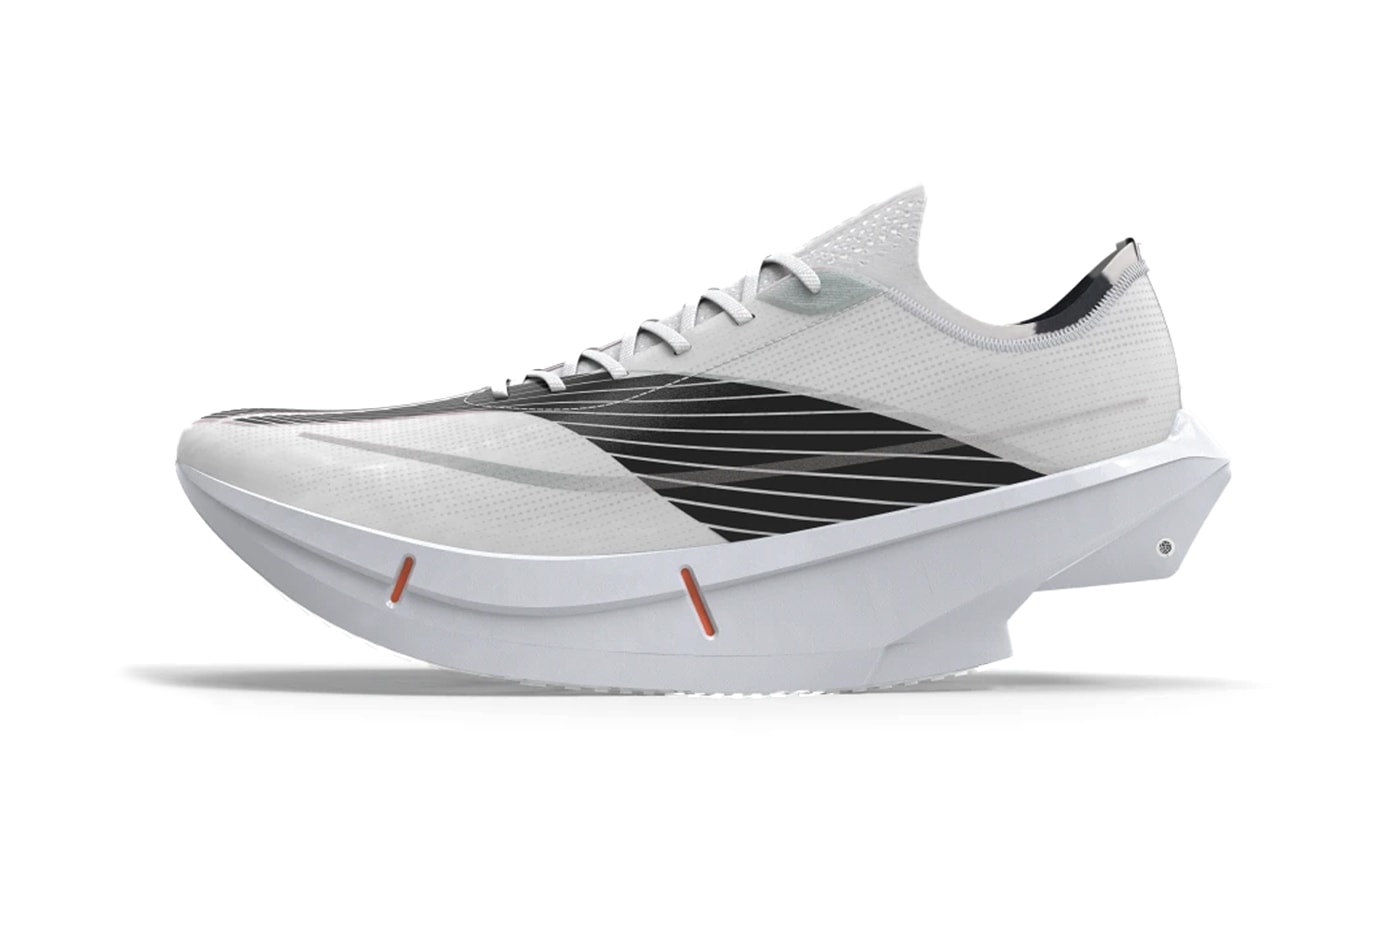 Li-Ning's No Heel Sneaker Concept Wins IF Design Prize dragonflight concept shoe chinese firm nike swoosh adidas